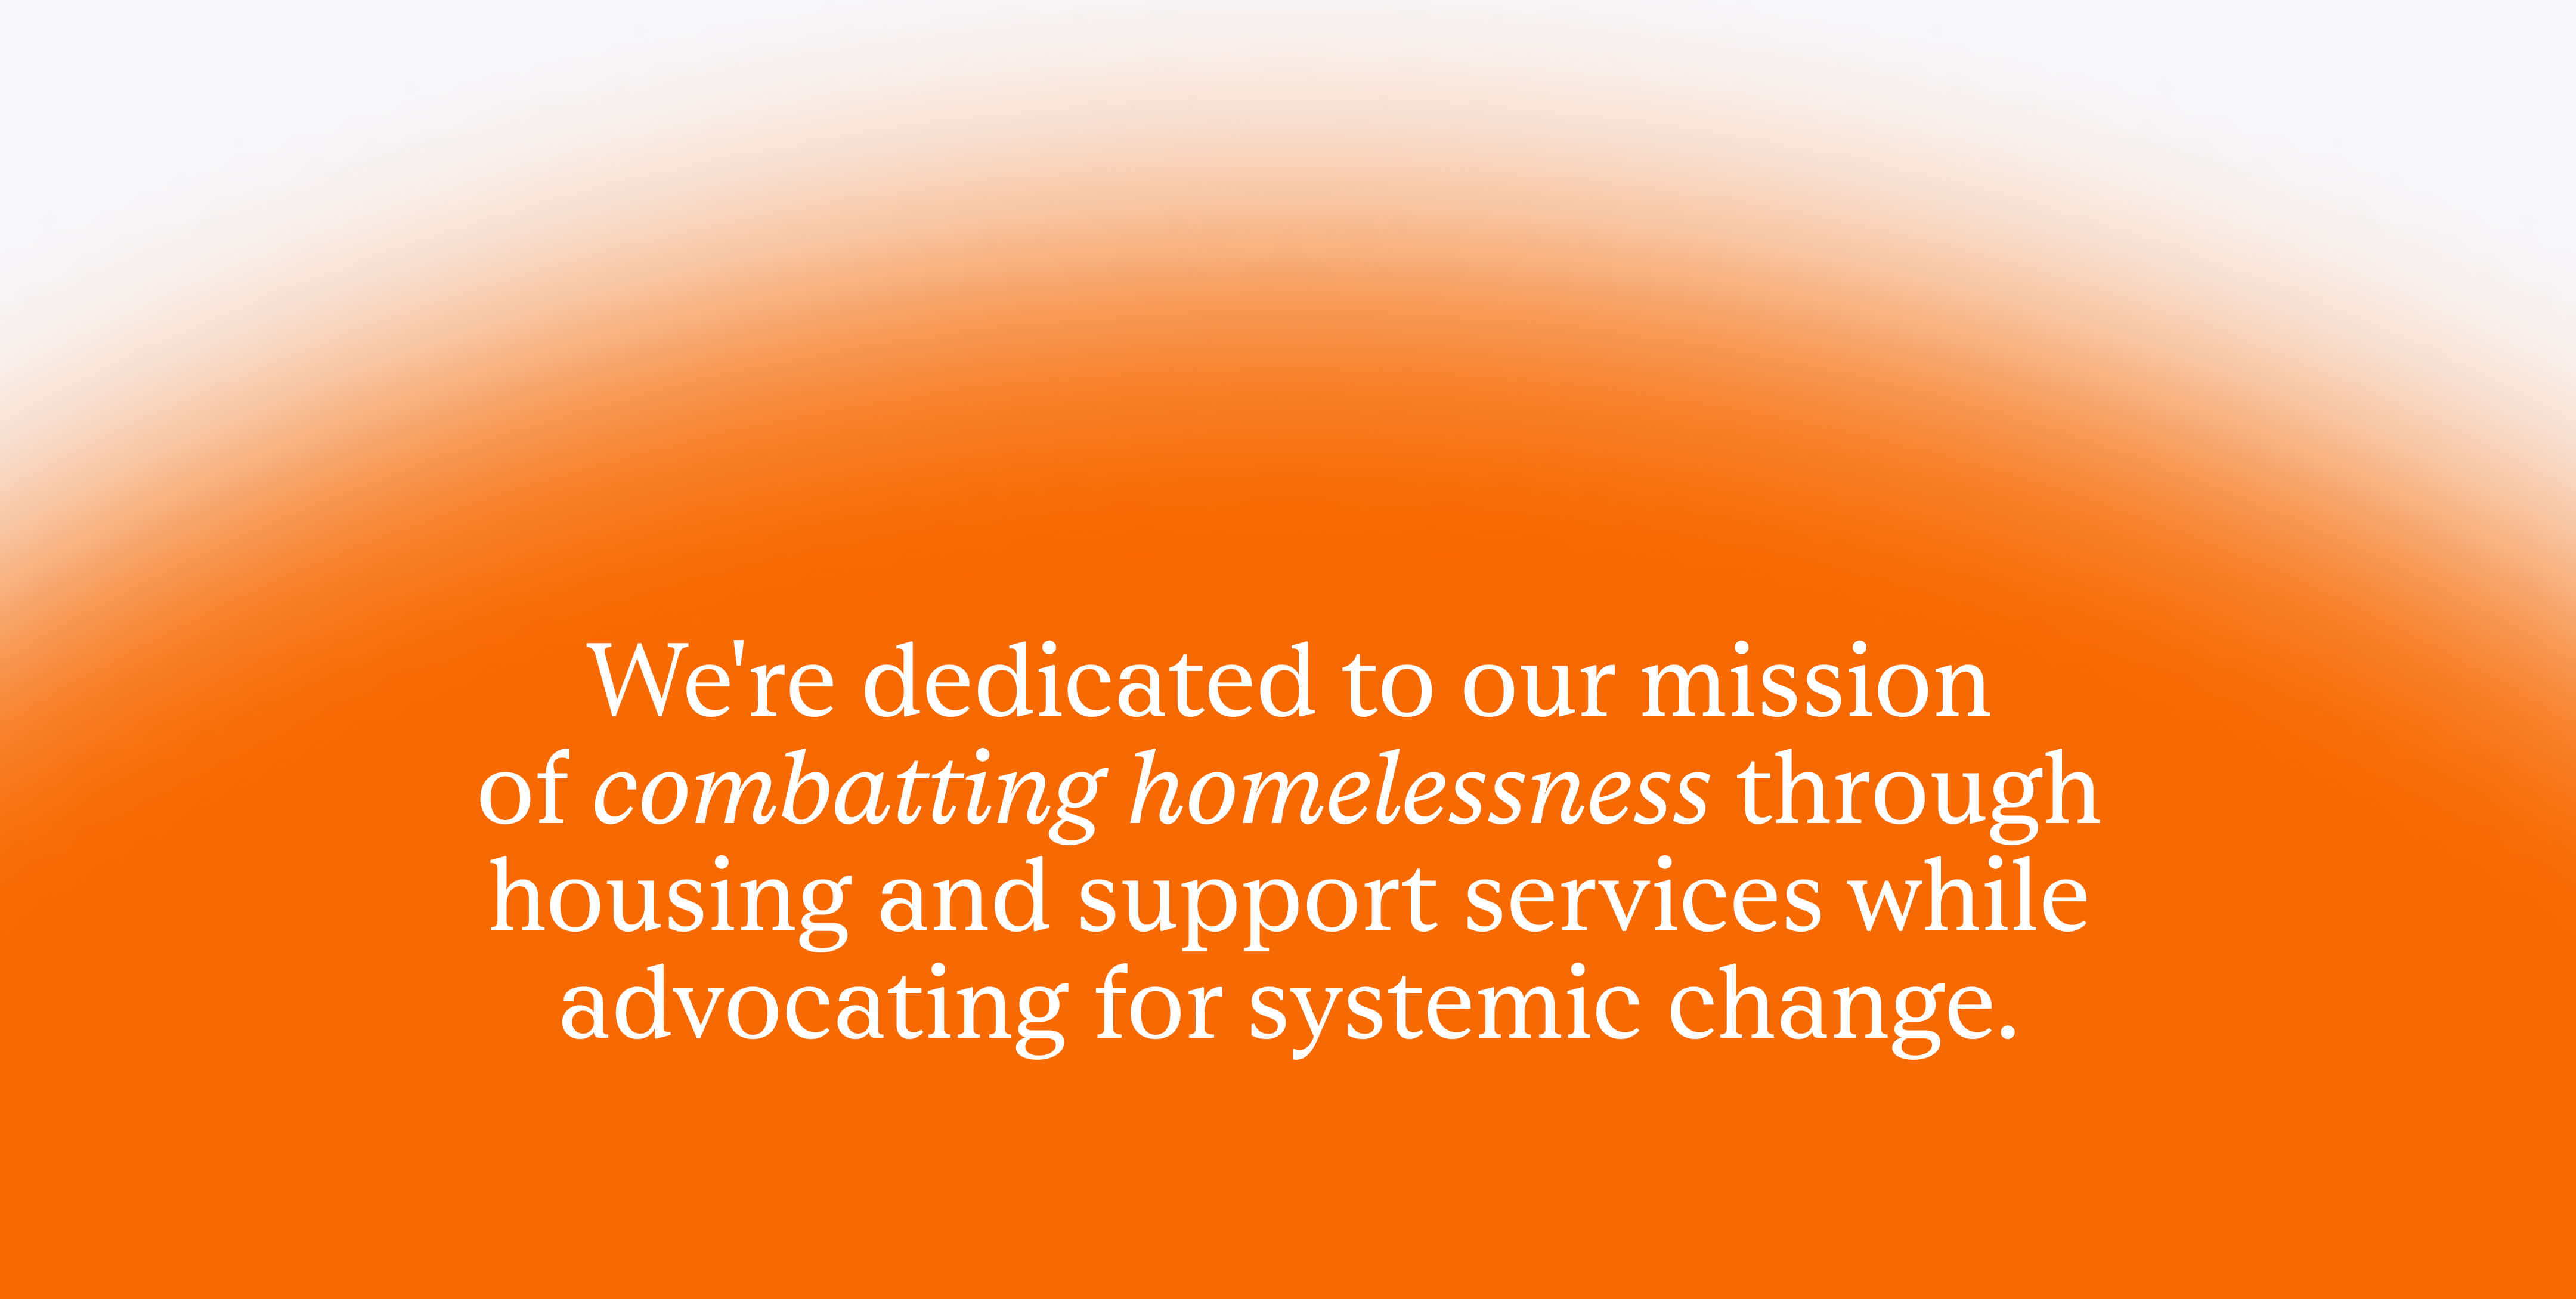 We're dedicated to our mission of combatting homelessness through housing and support services while advocating for systemic change.